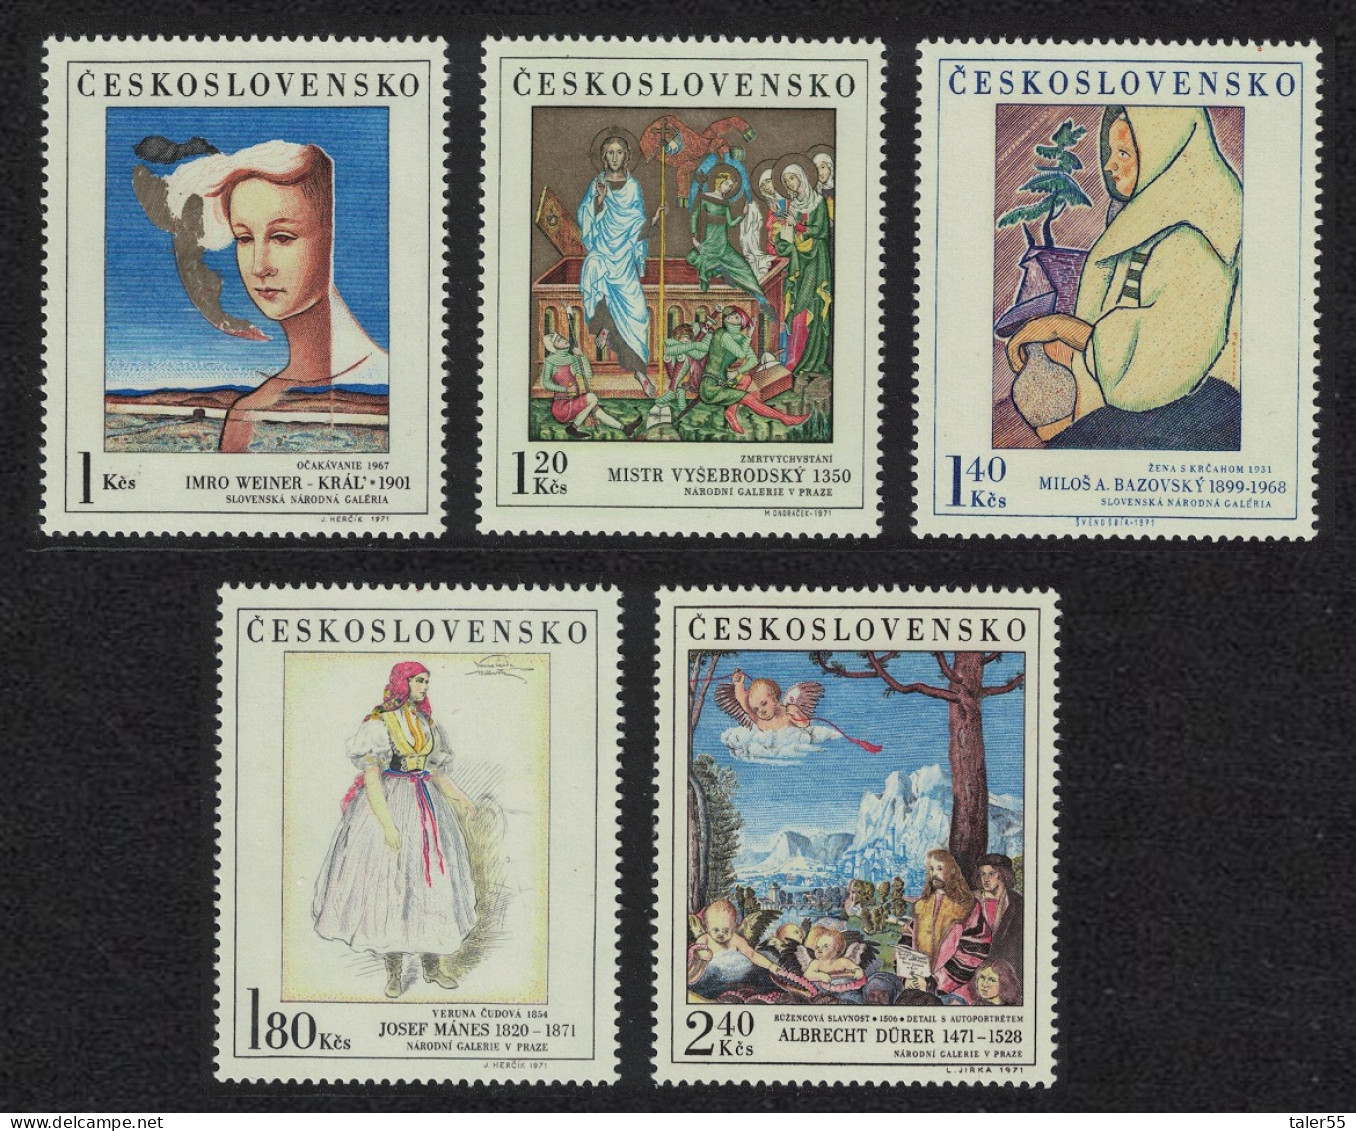 Czechoslovakia Art Paintings 6th Issue 5v 1971 MNH SG#1999-2003 - Unused Stamps